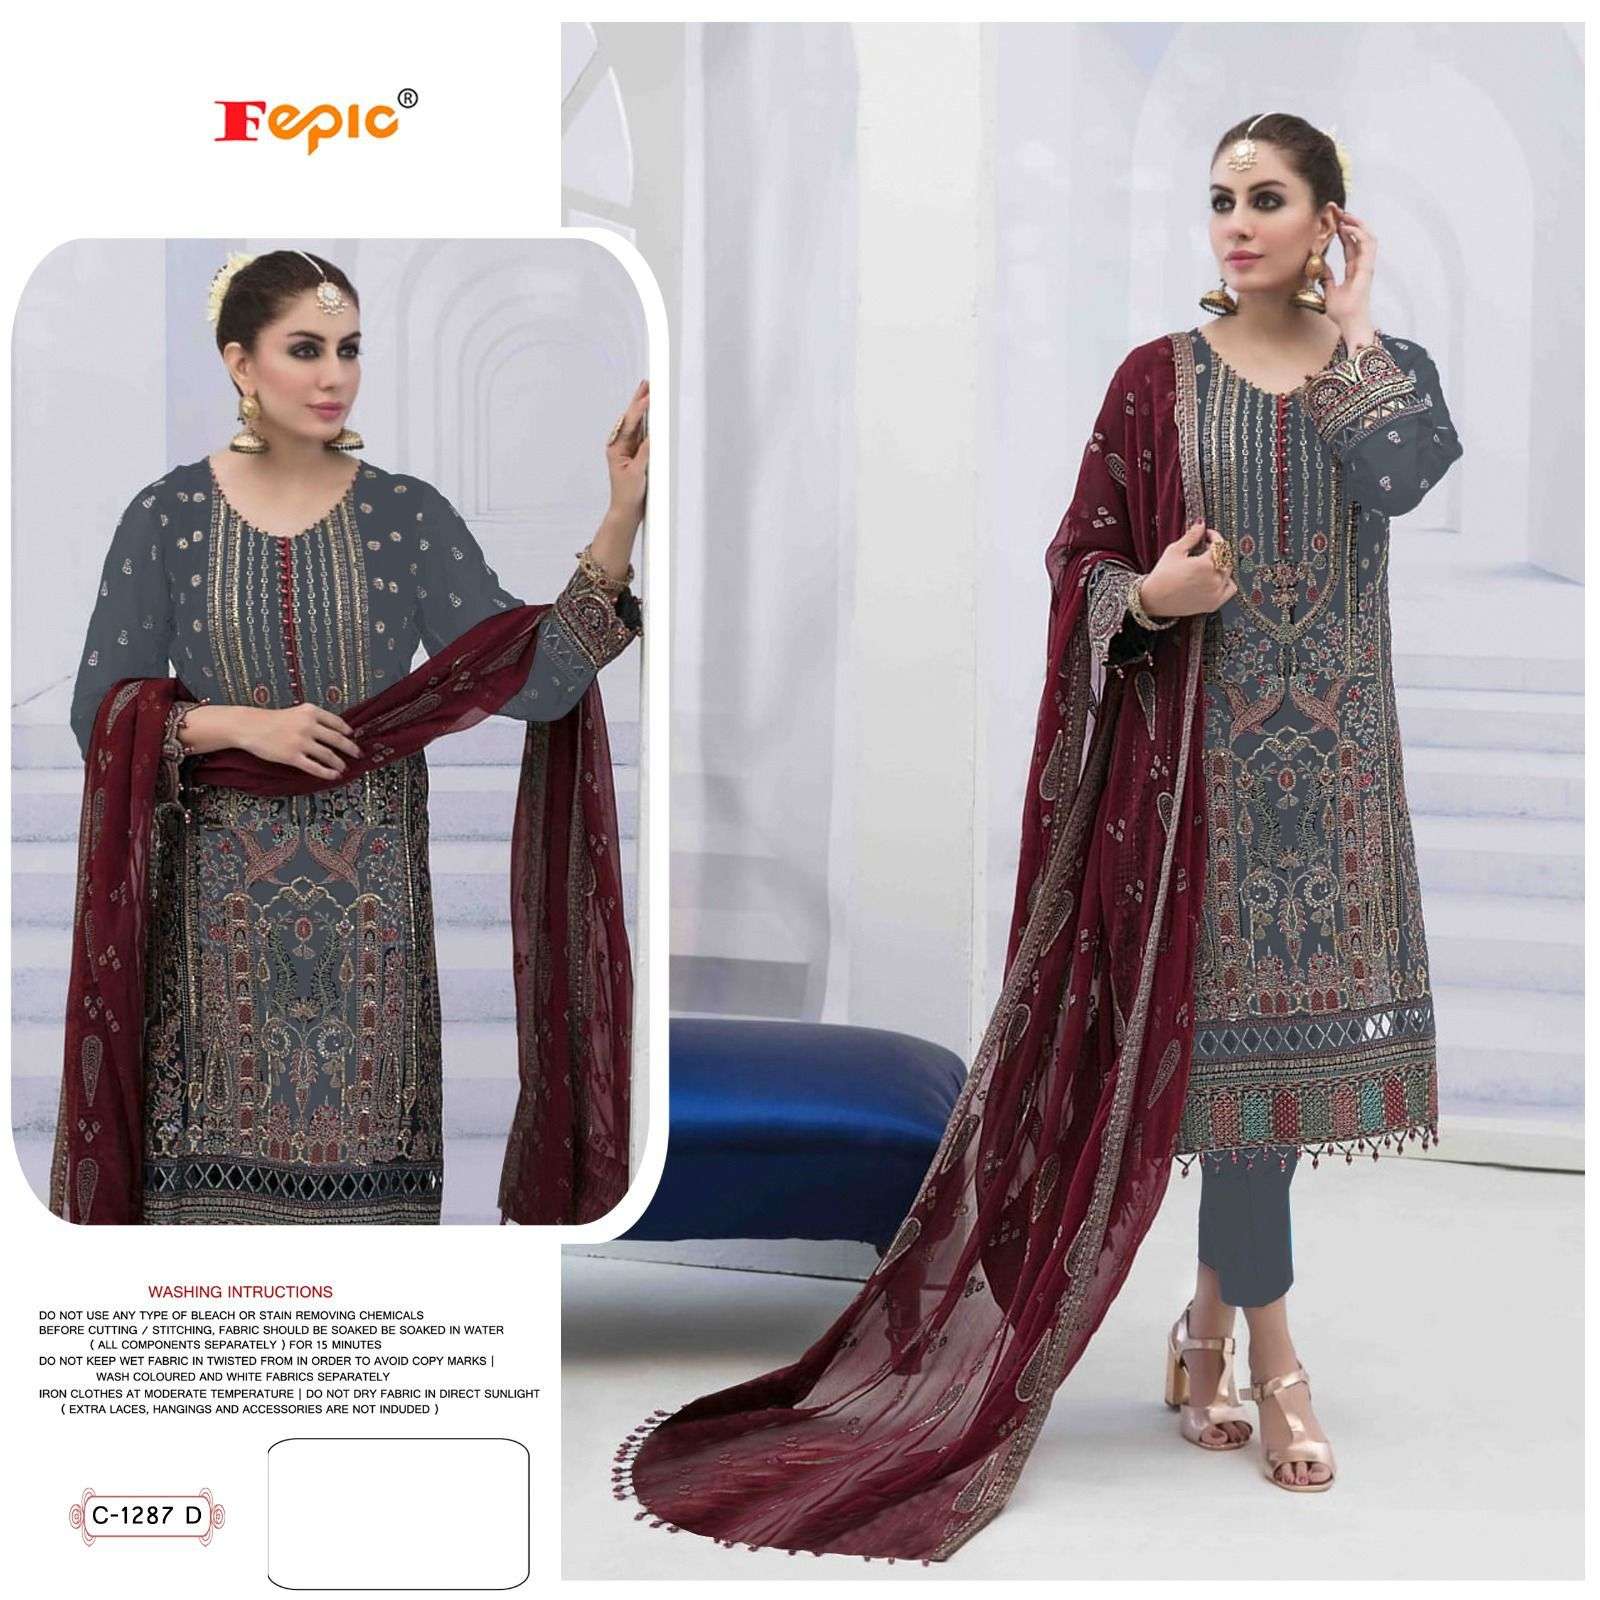 FEPIC ROSEMEEN 1287 NEW COLOUR GEORGETTE EMBROIDERED PAKISTA...